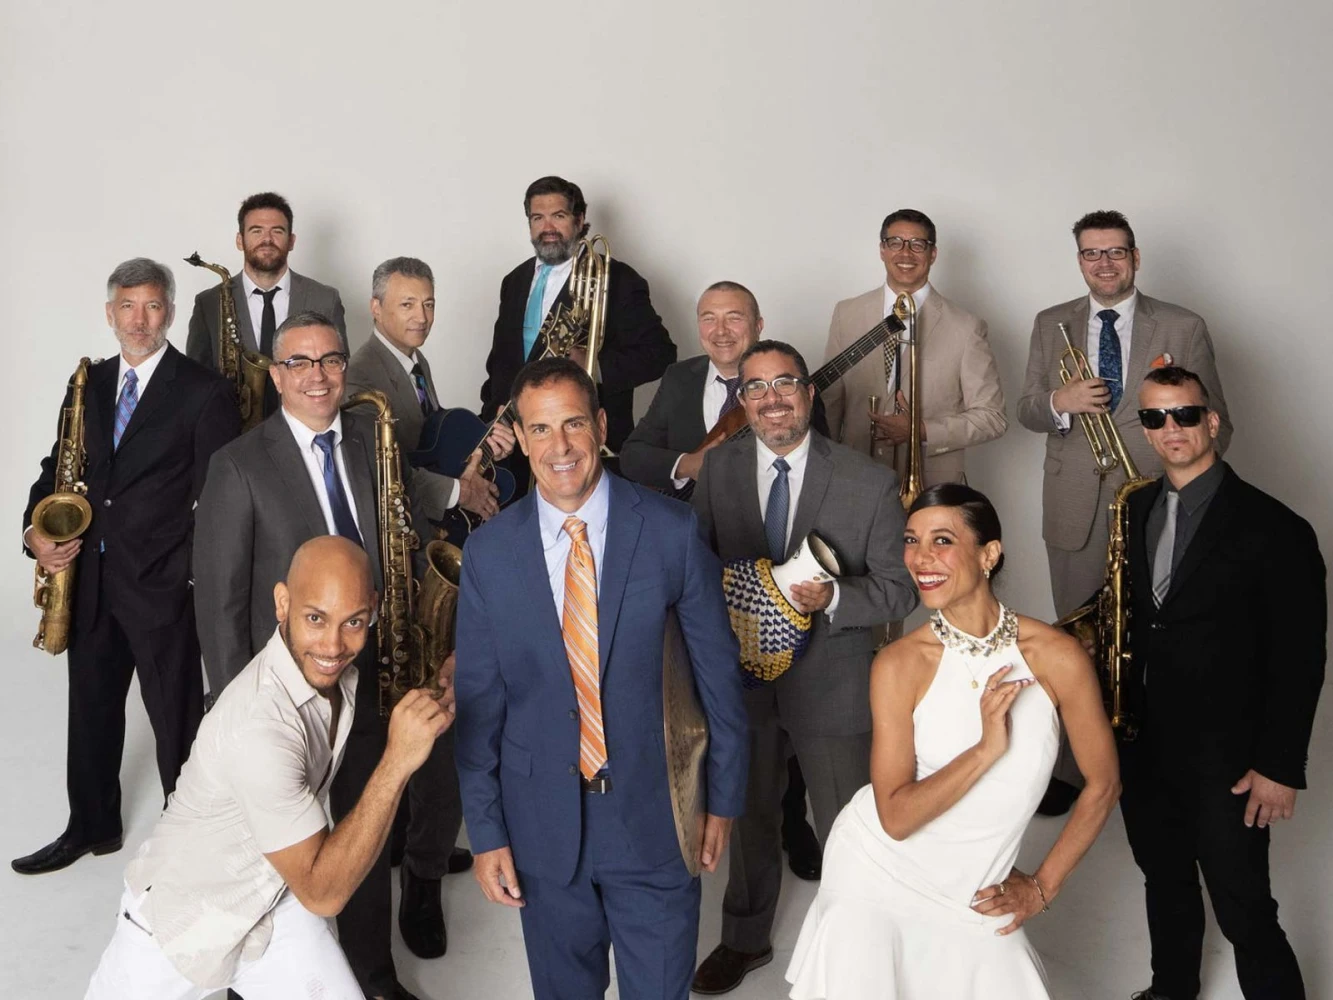 Joe McCarthy's New York Afro Bop Alliance Big Band Presents The Pan American Nutcracker Suite: What to expect - 1